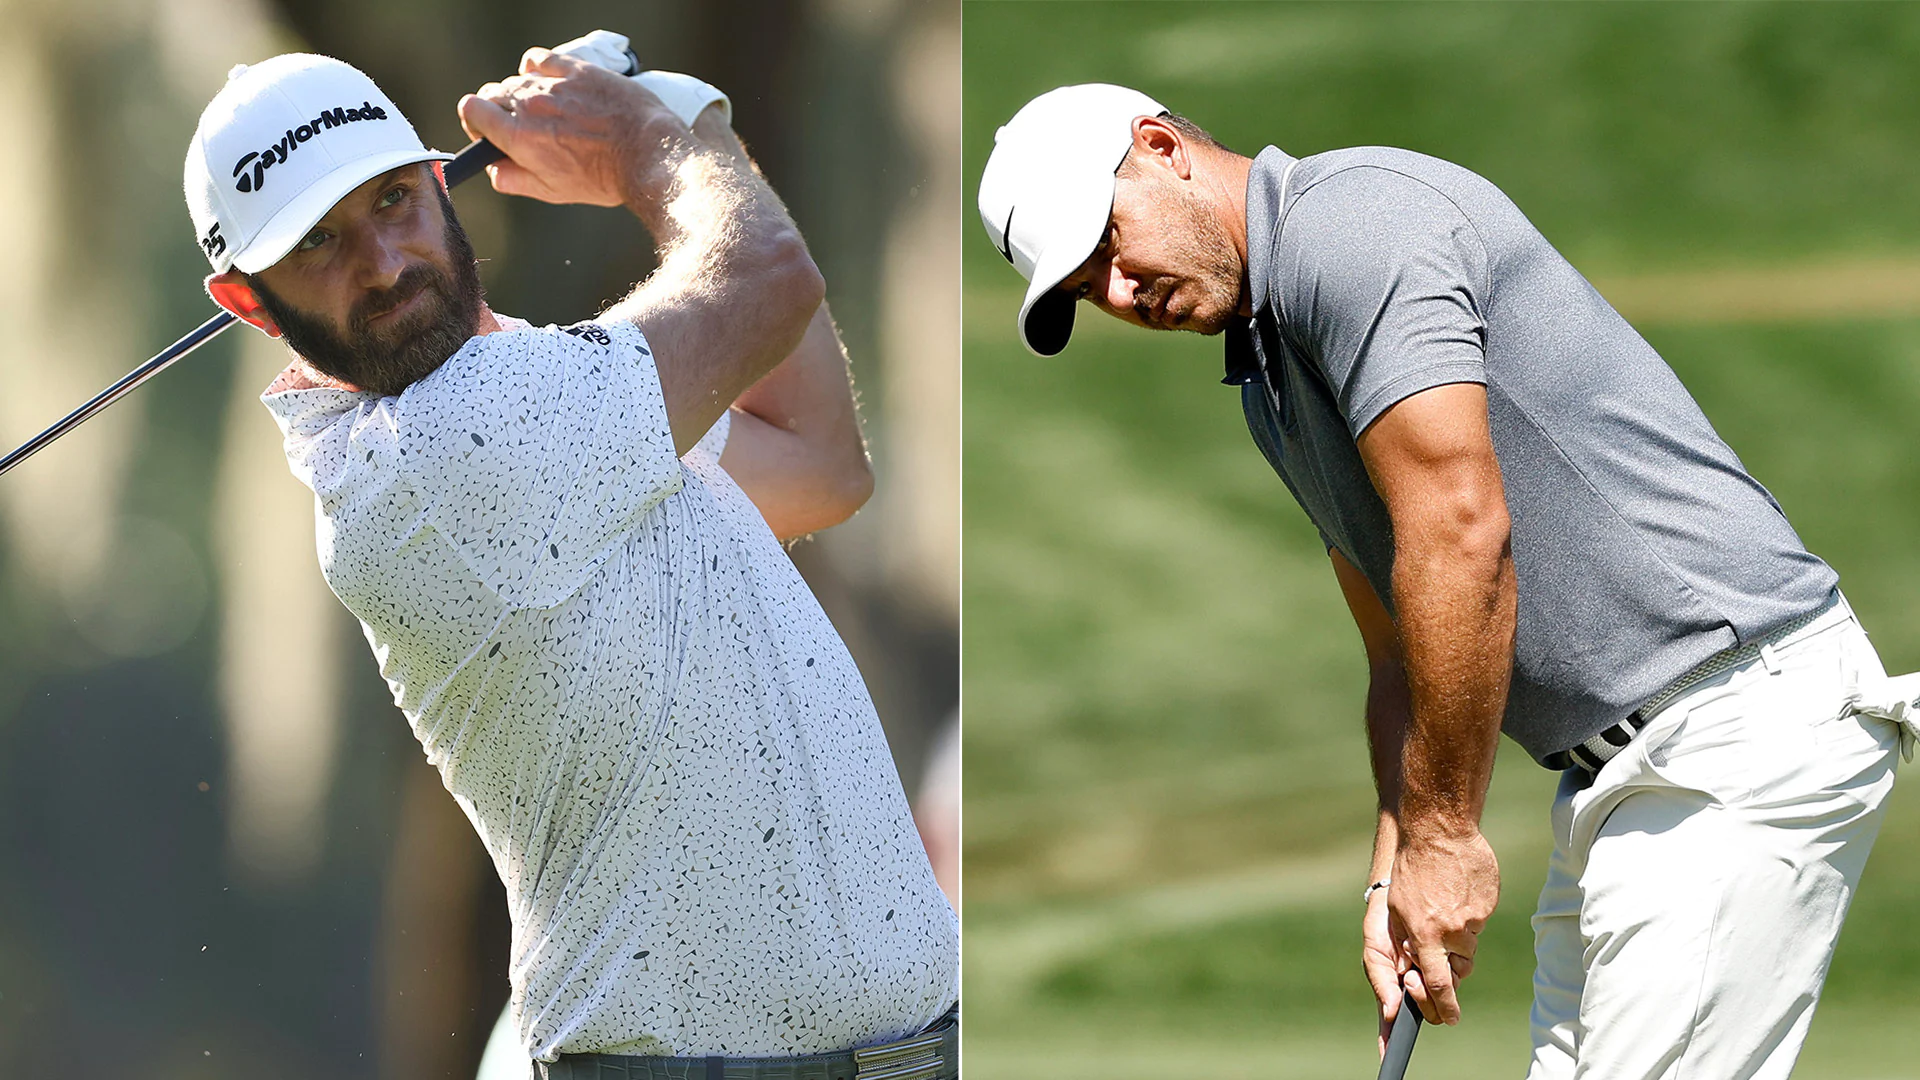 Dustin Johnson, Brooks Koepka, trying to end winless droughts, open with 67s at Valspar 2